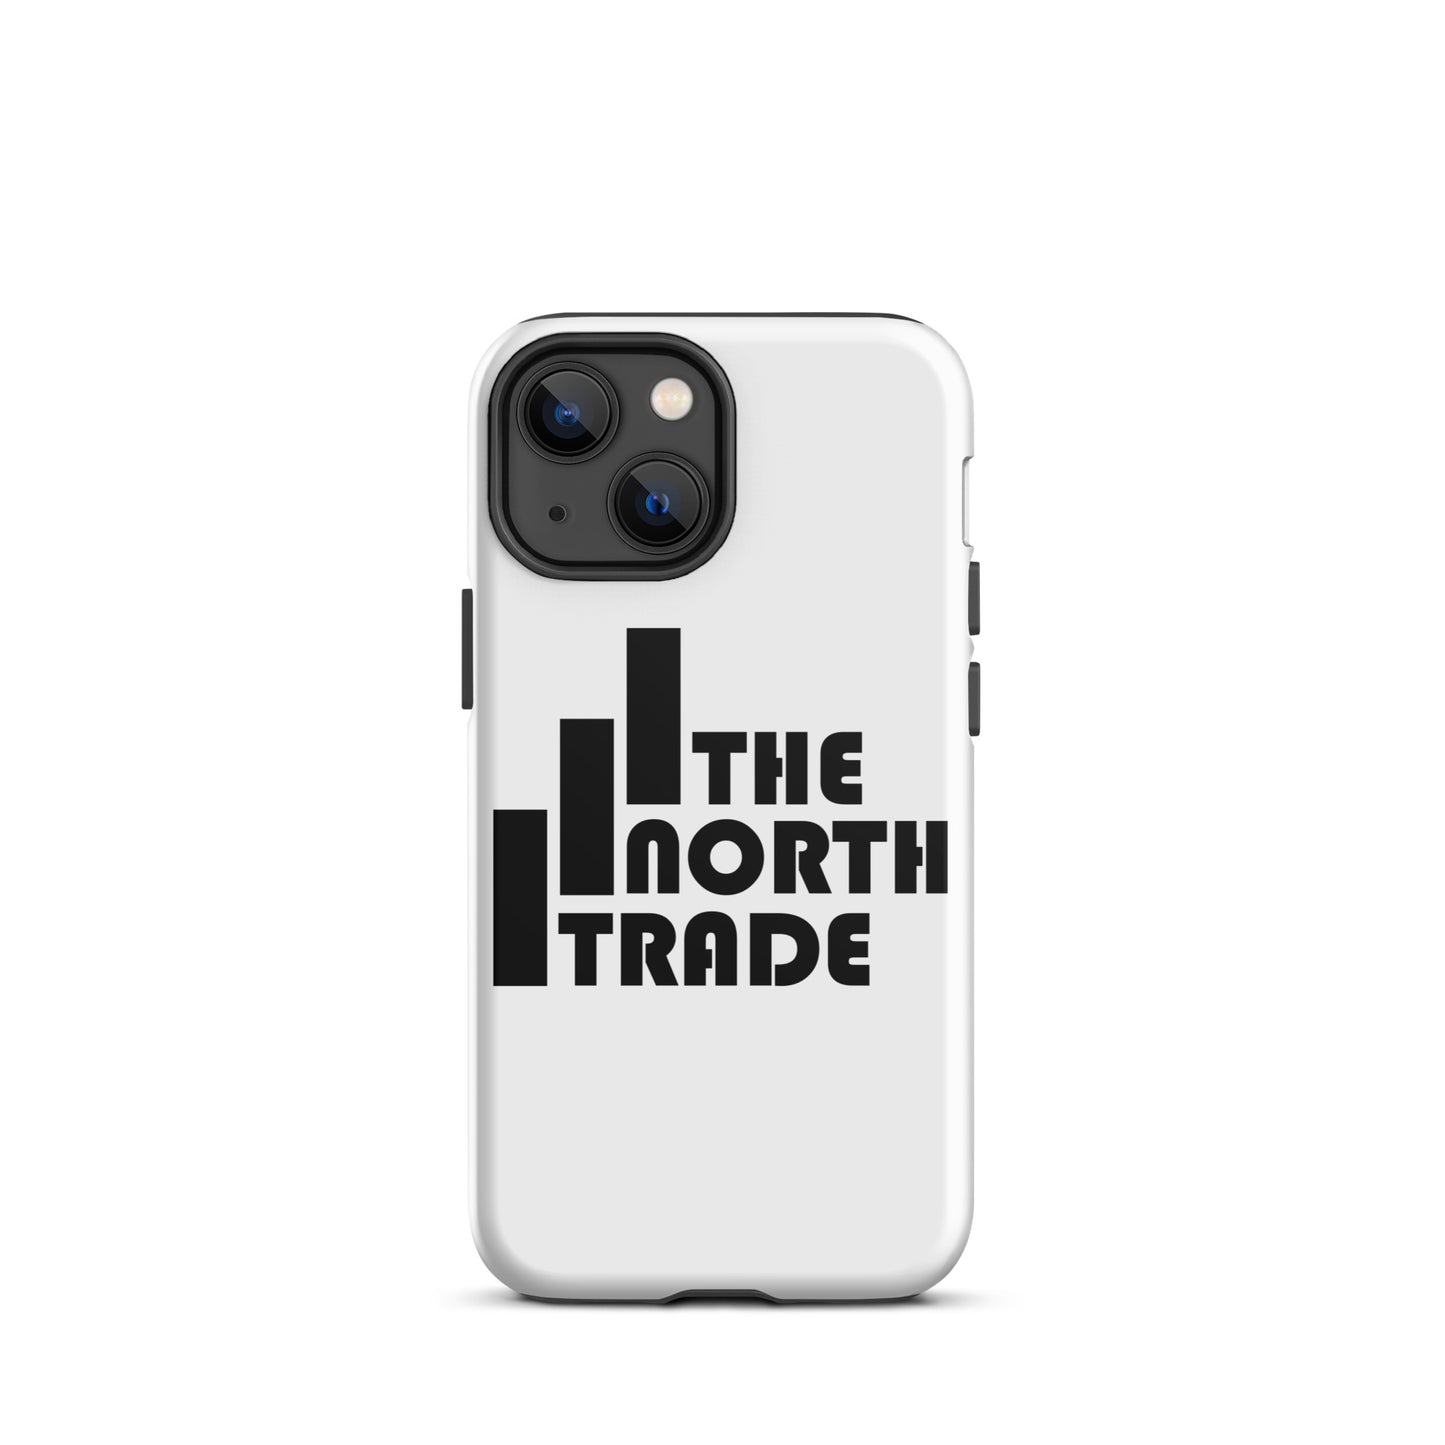 The North Trade Tough iPhone Case